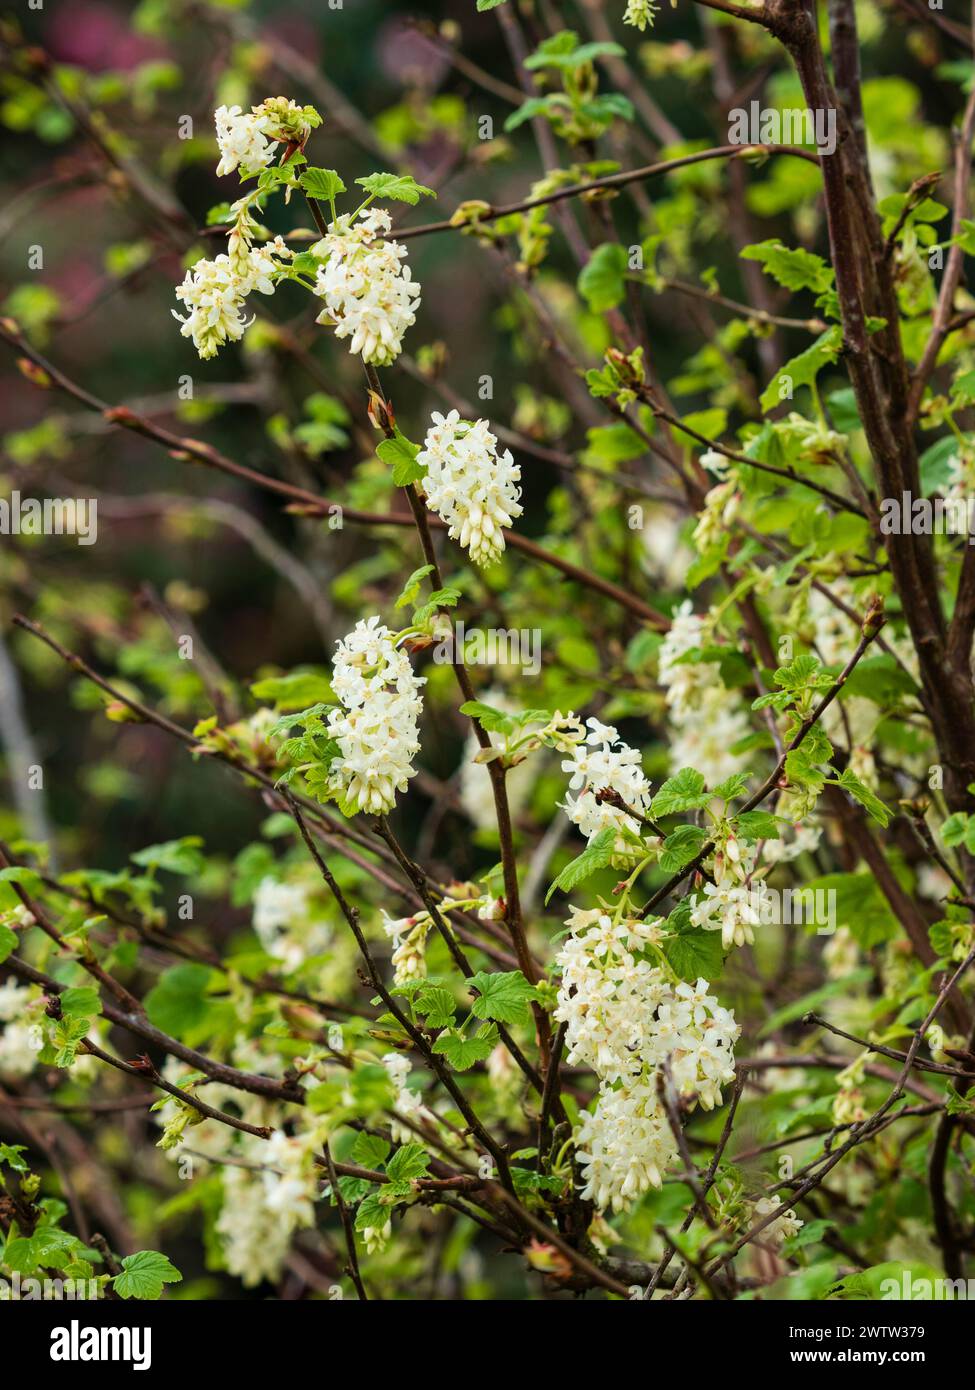 Early spring racemes filled with white blooms of the hardy deciduous flowering currant, Ribes sanguineum 'White Icicle' Stock Photo